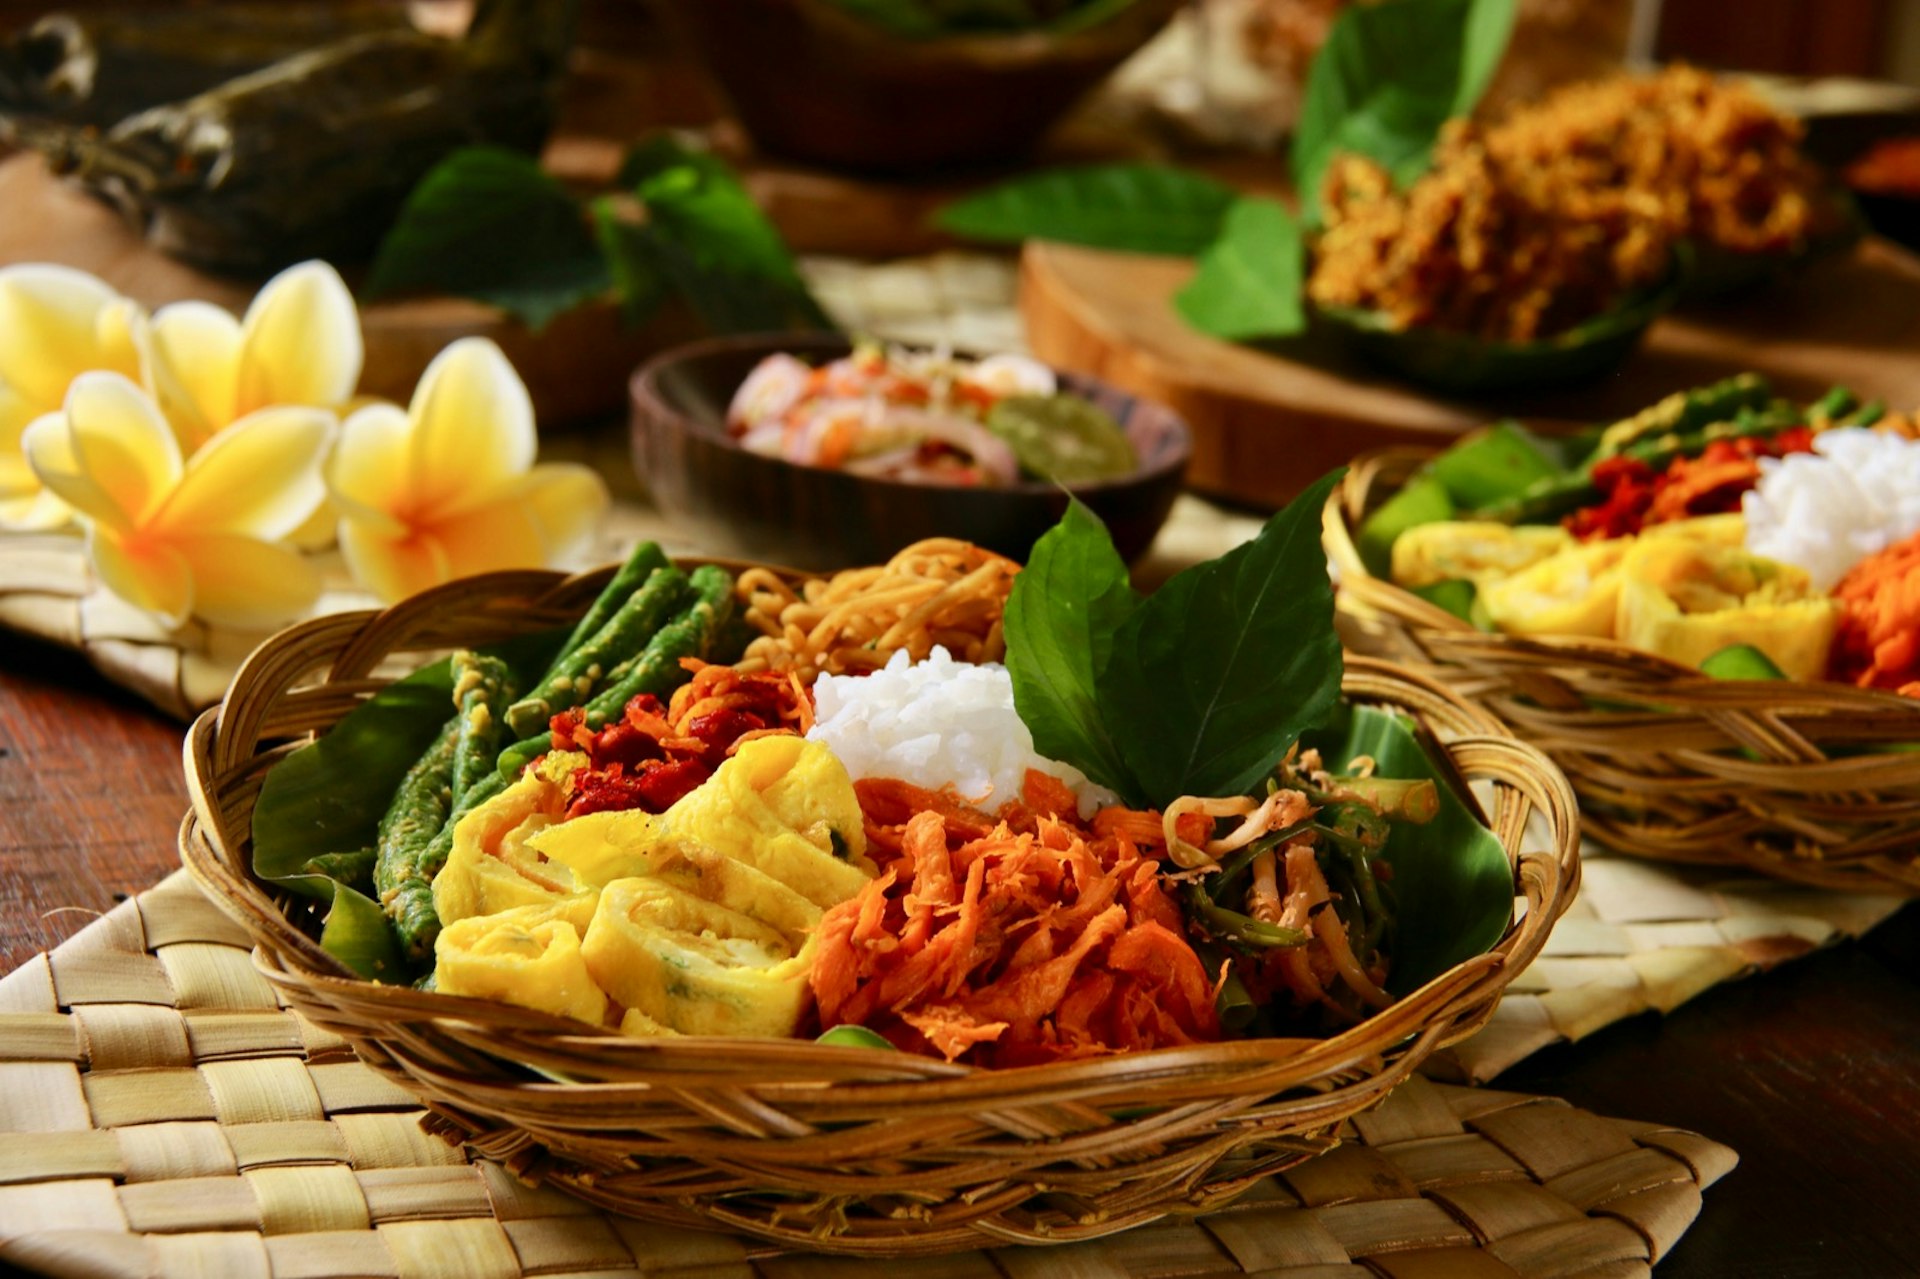 A popular Balinese meal of rice with a variety of vegetables in a wooden bowl